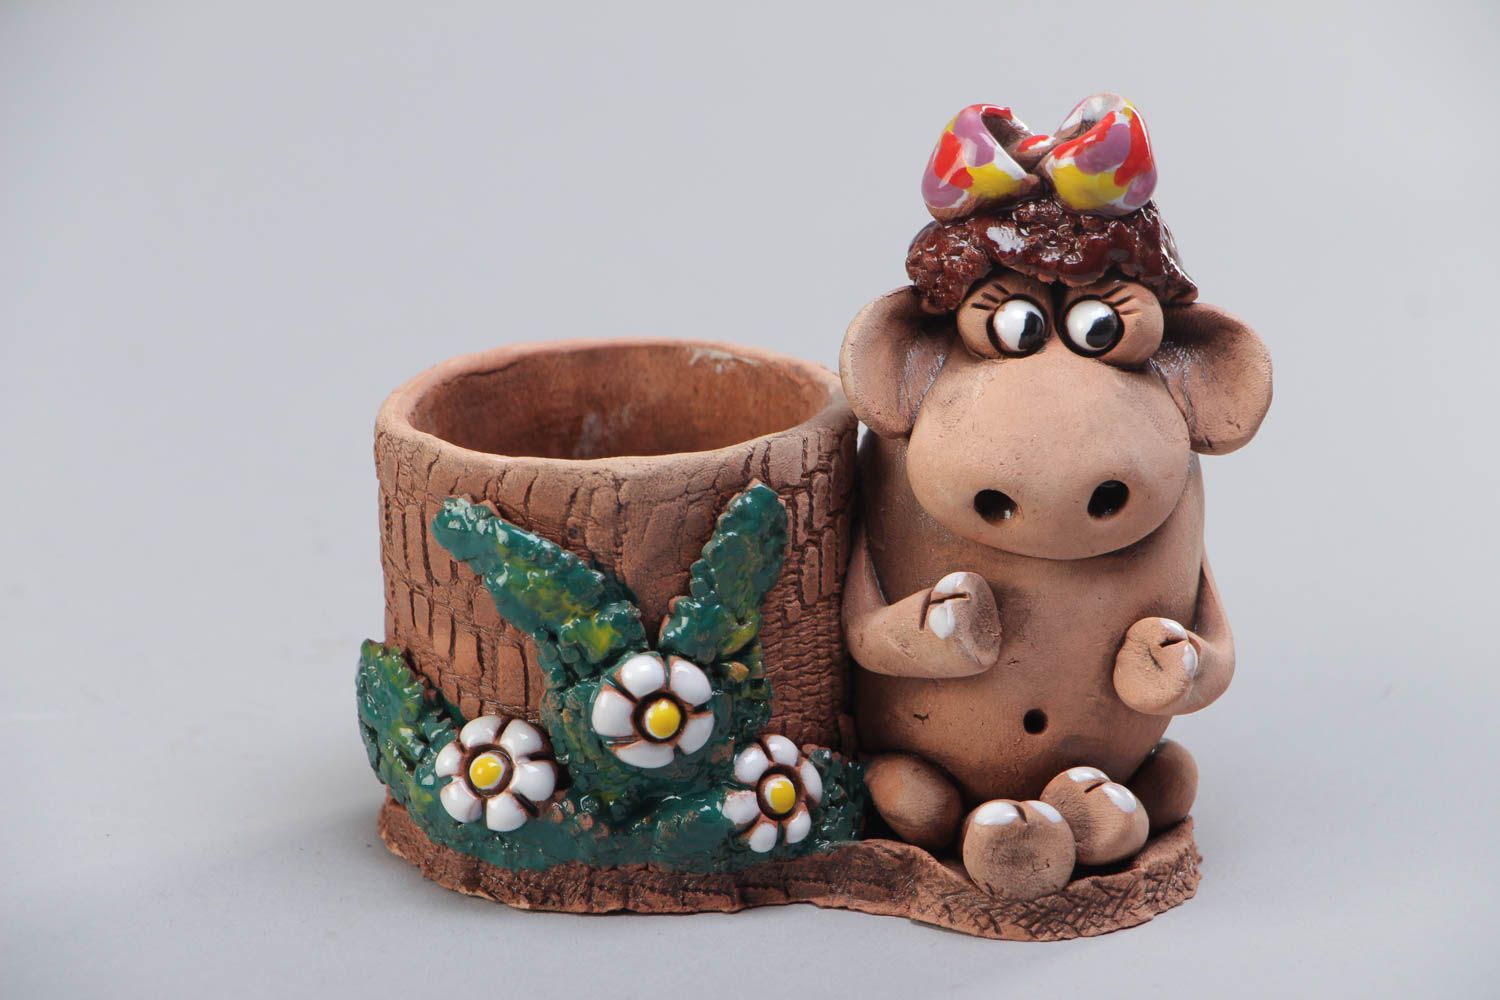 Handmade designer ceramic holder for pencils and other stationery with figurine photo 2